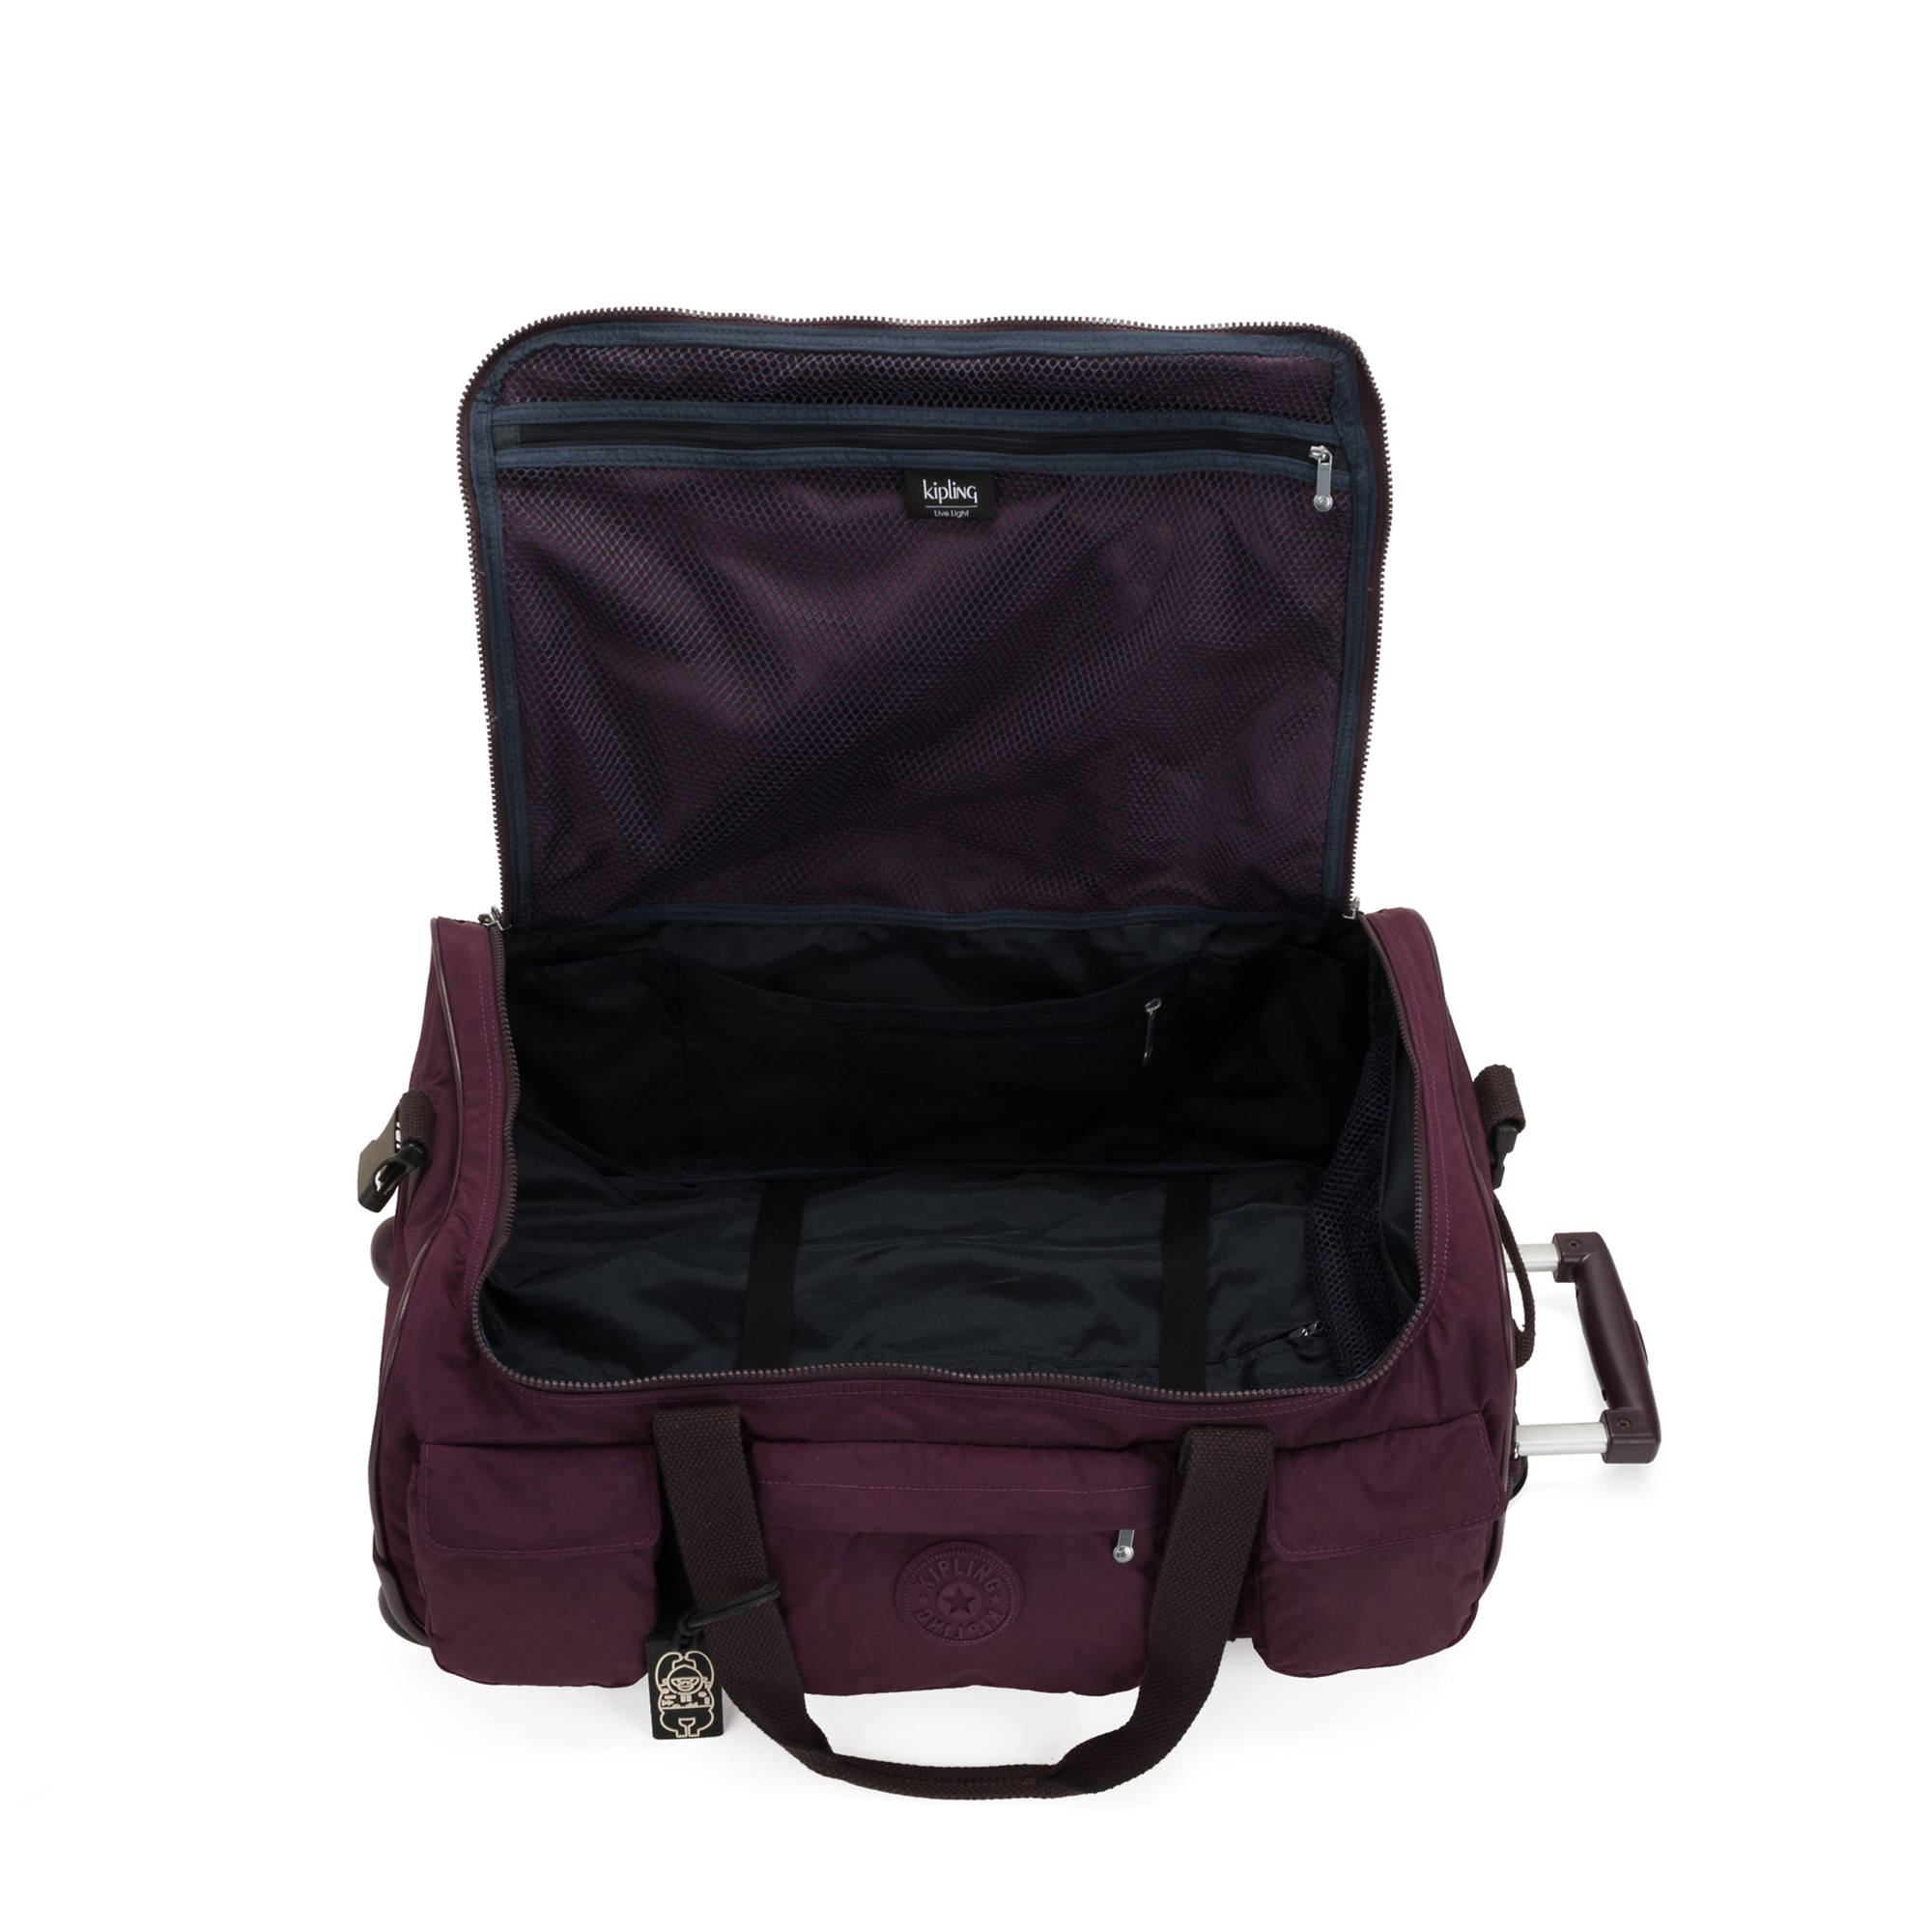 Kipling Discover Small Carry-On Rolling Luggage Duffle | eBay